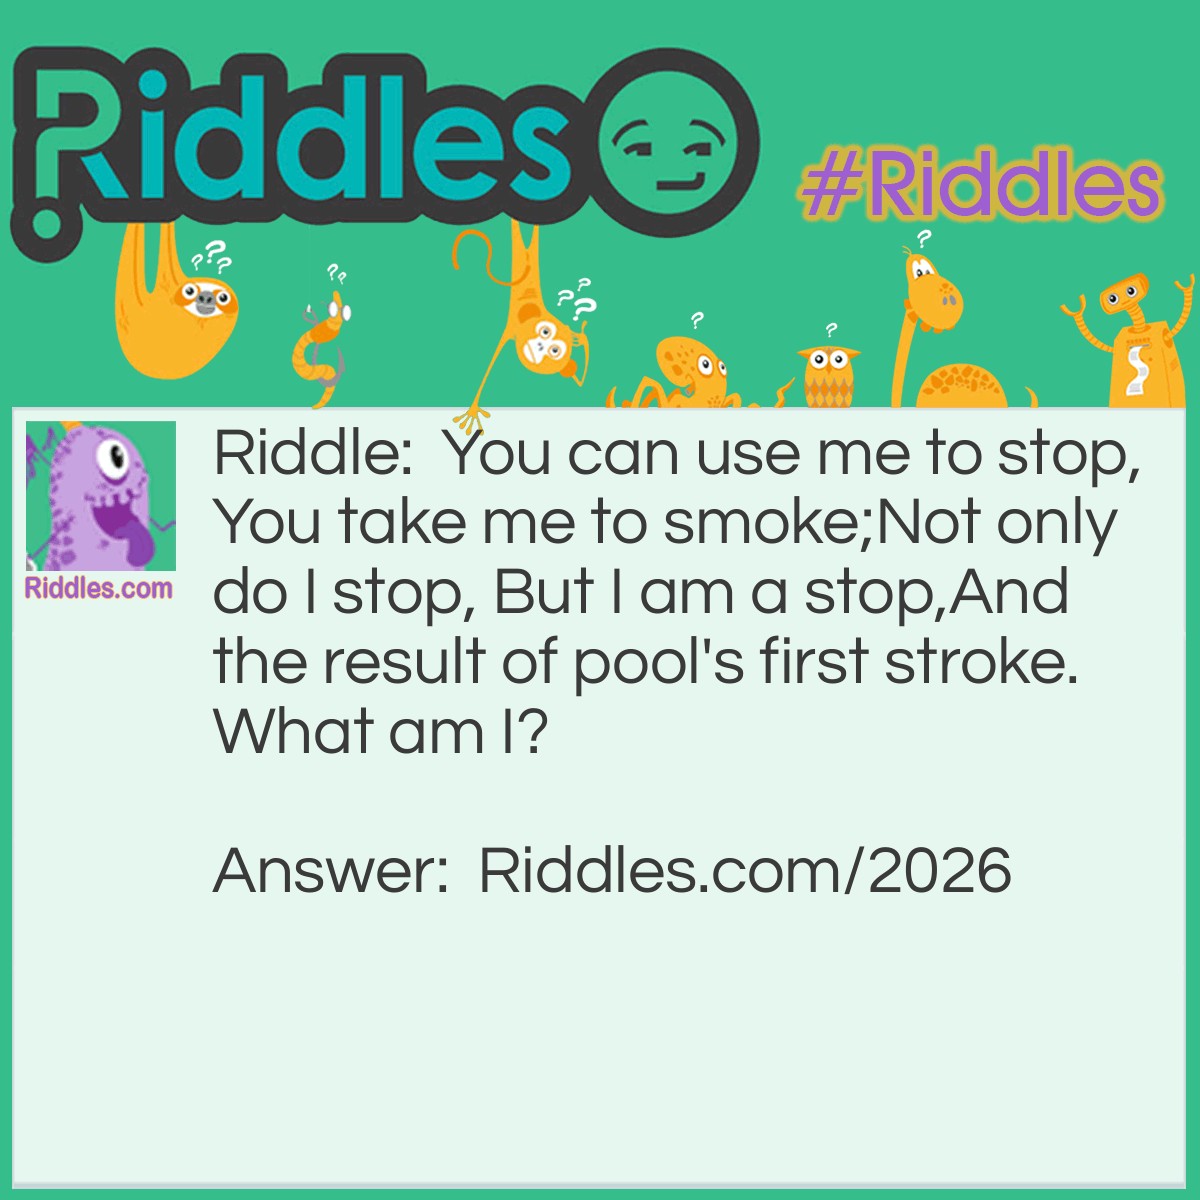 Riddle: You can use me to stop,
You take me to smoke;
Not only do I stop, But I am a stop,
And the result of pool's first stroke.
What am I? Answer: Brake/ Break